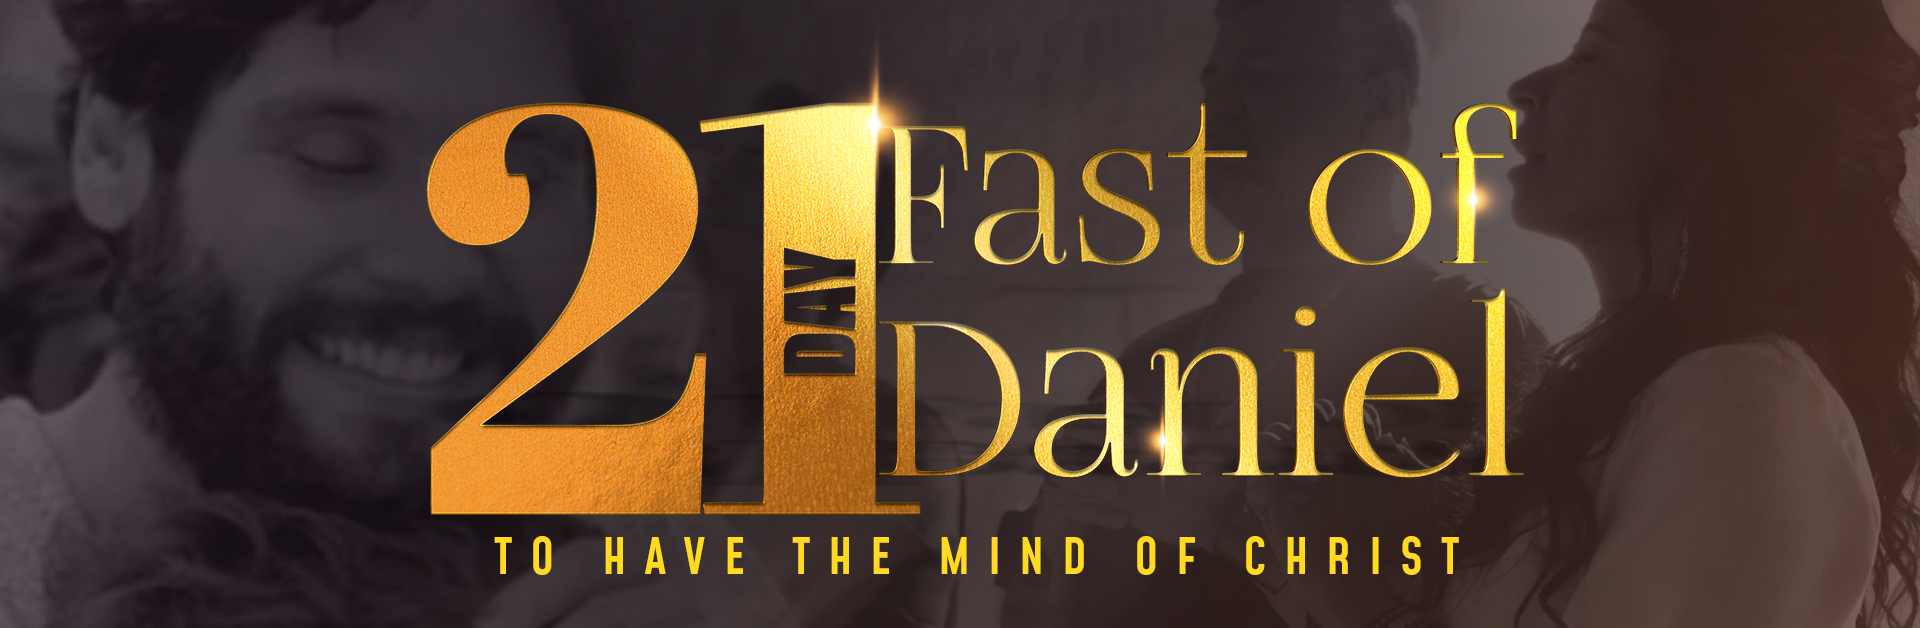 Fast of Daniel: 21 Days To Have the Mind of Christ1 min read